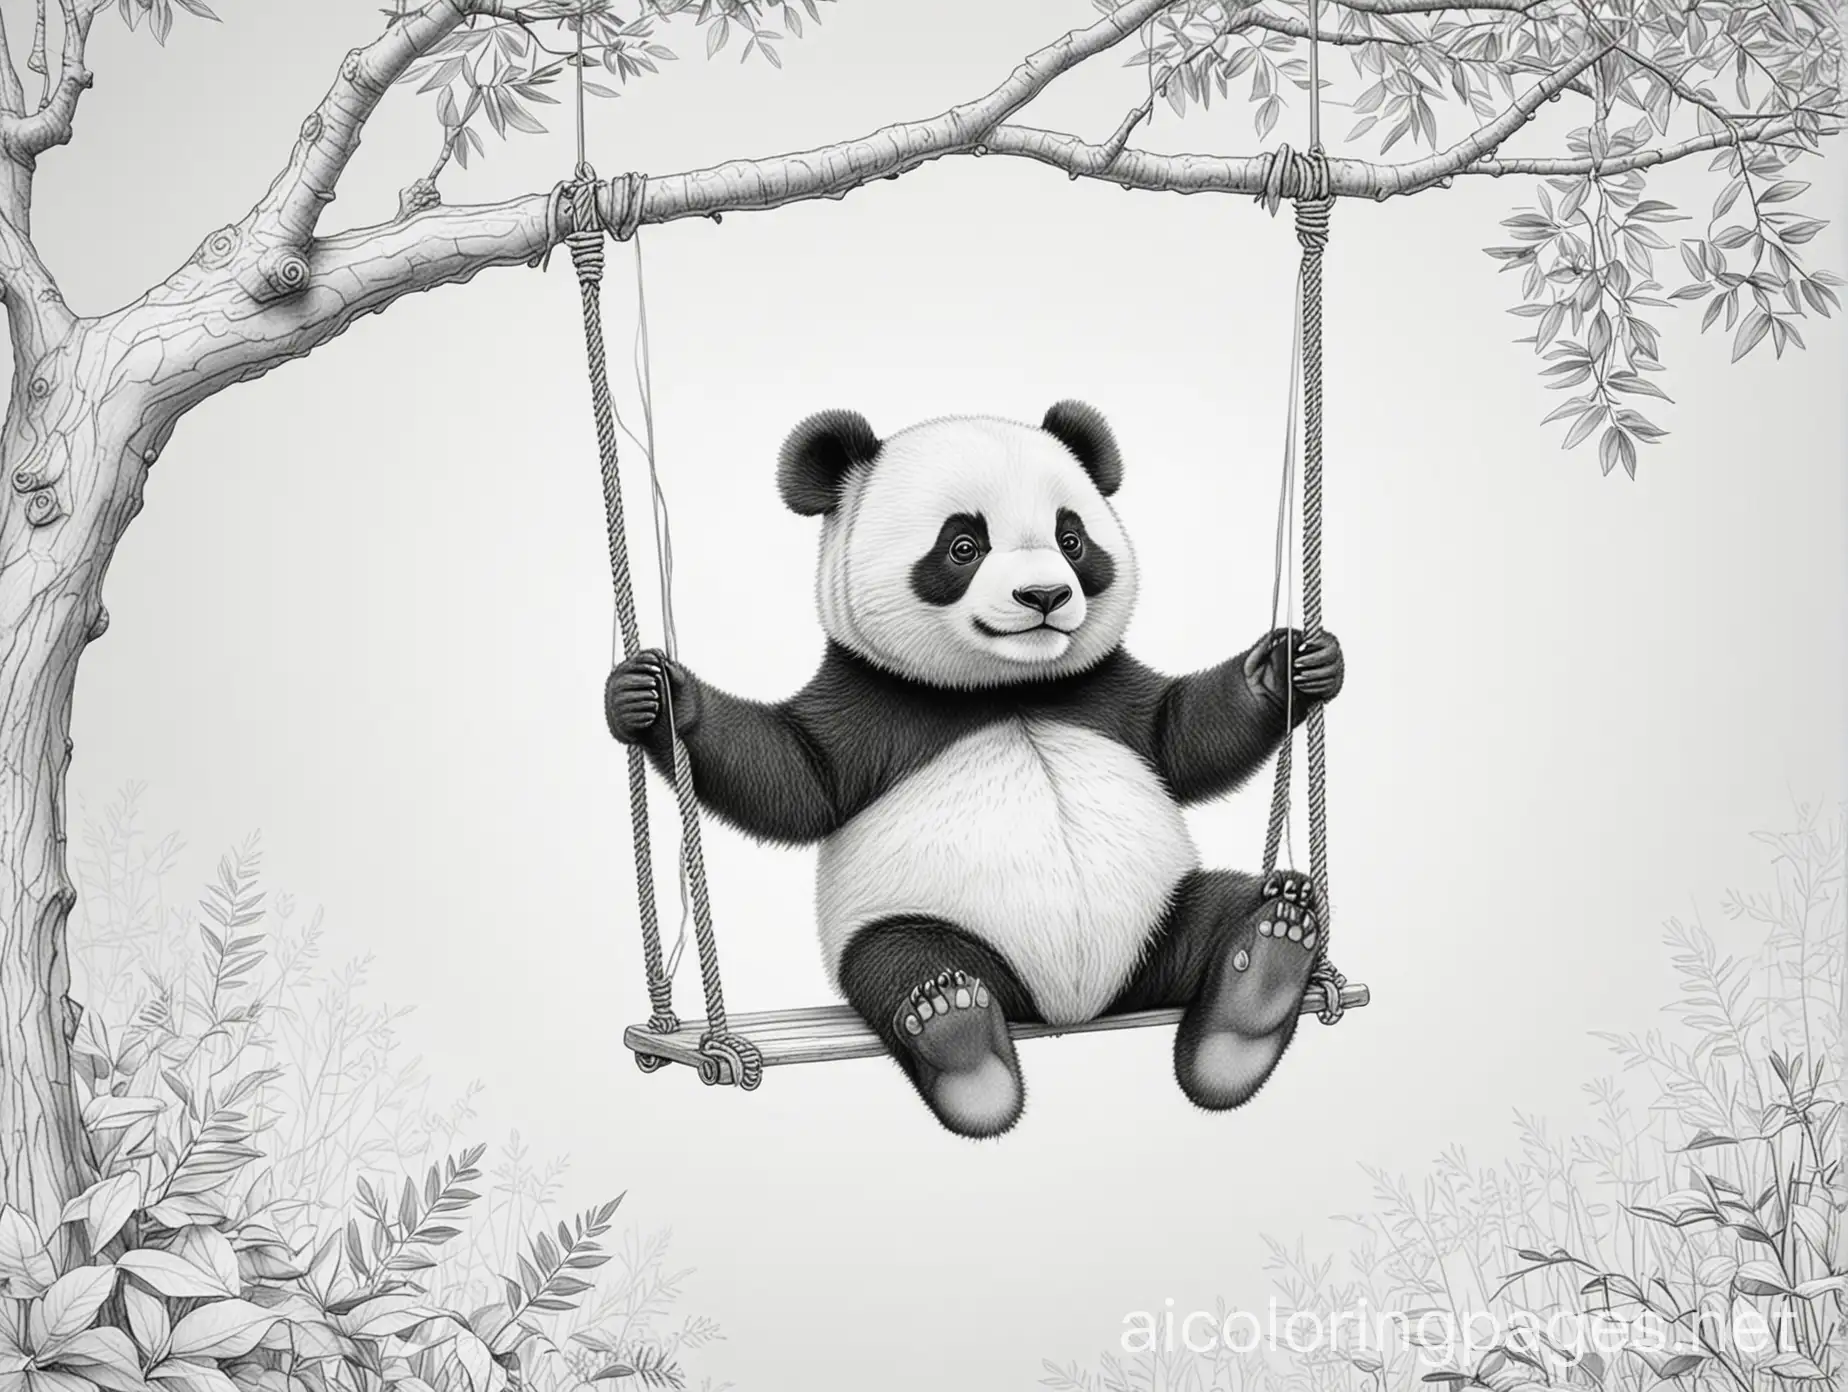 Panda on a swing, Coloring Page, black and white, line art, white background, Simplicity, Ample White Space. The background of the coloring page is plain white to make it easy for young children to color within the lines. The outlines of all the subjects are easy to distinguish, making it simple for kids to color without too much difficulty